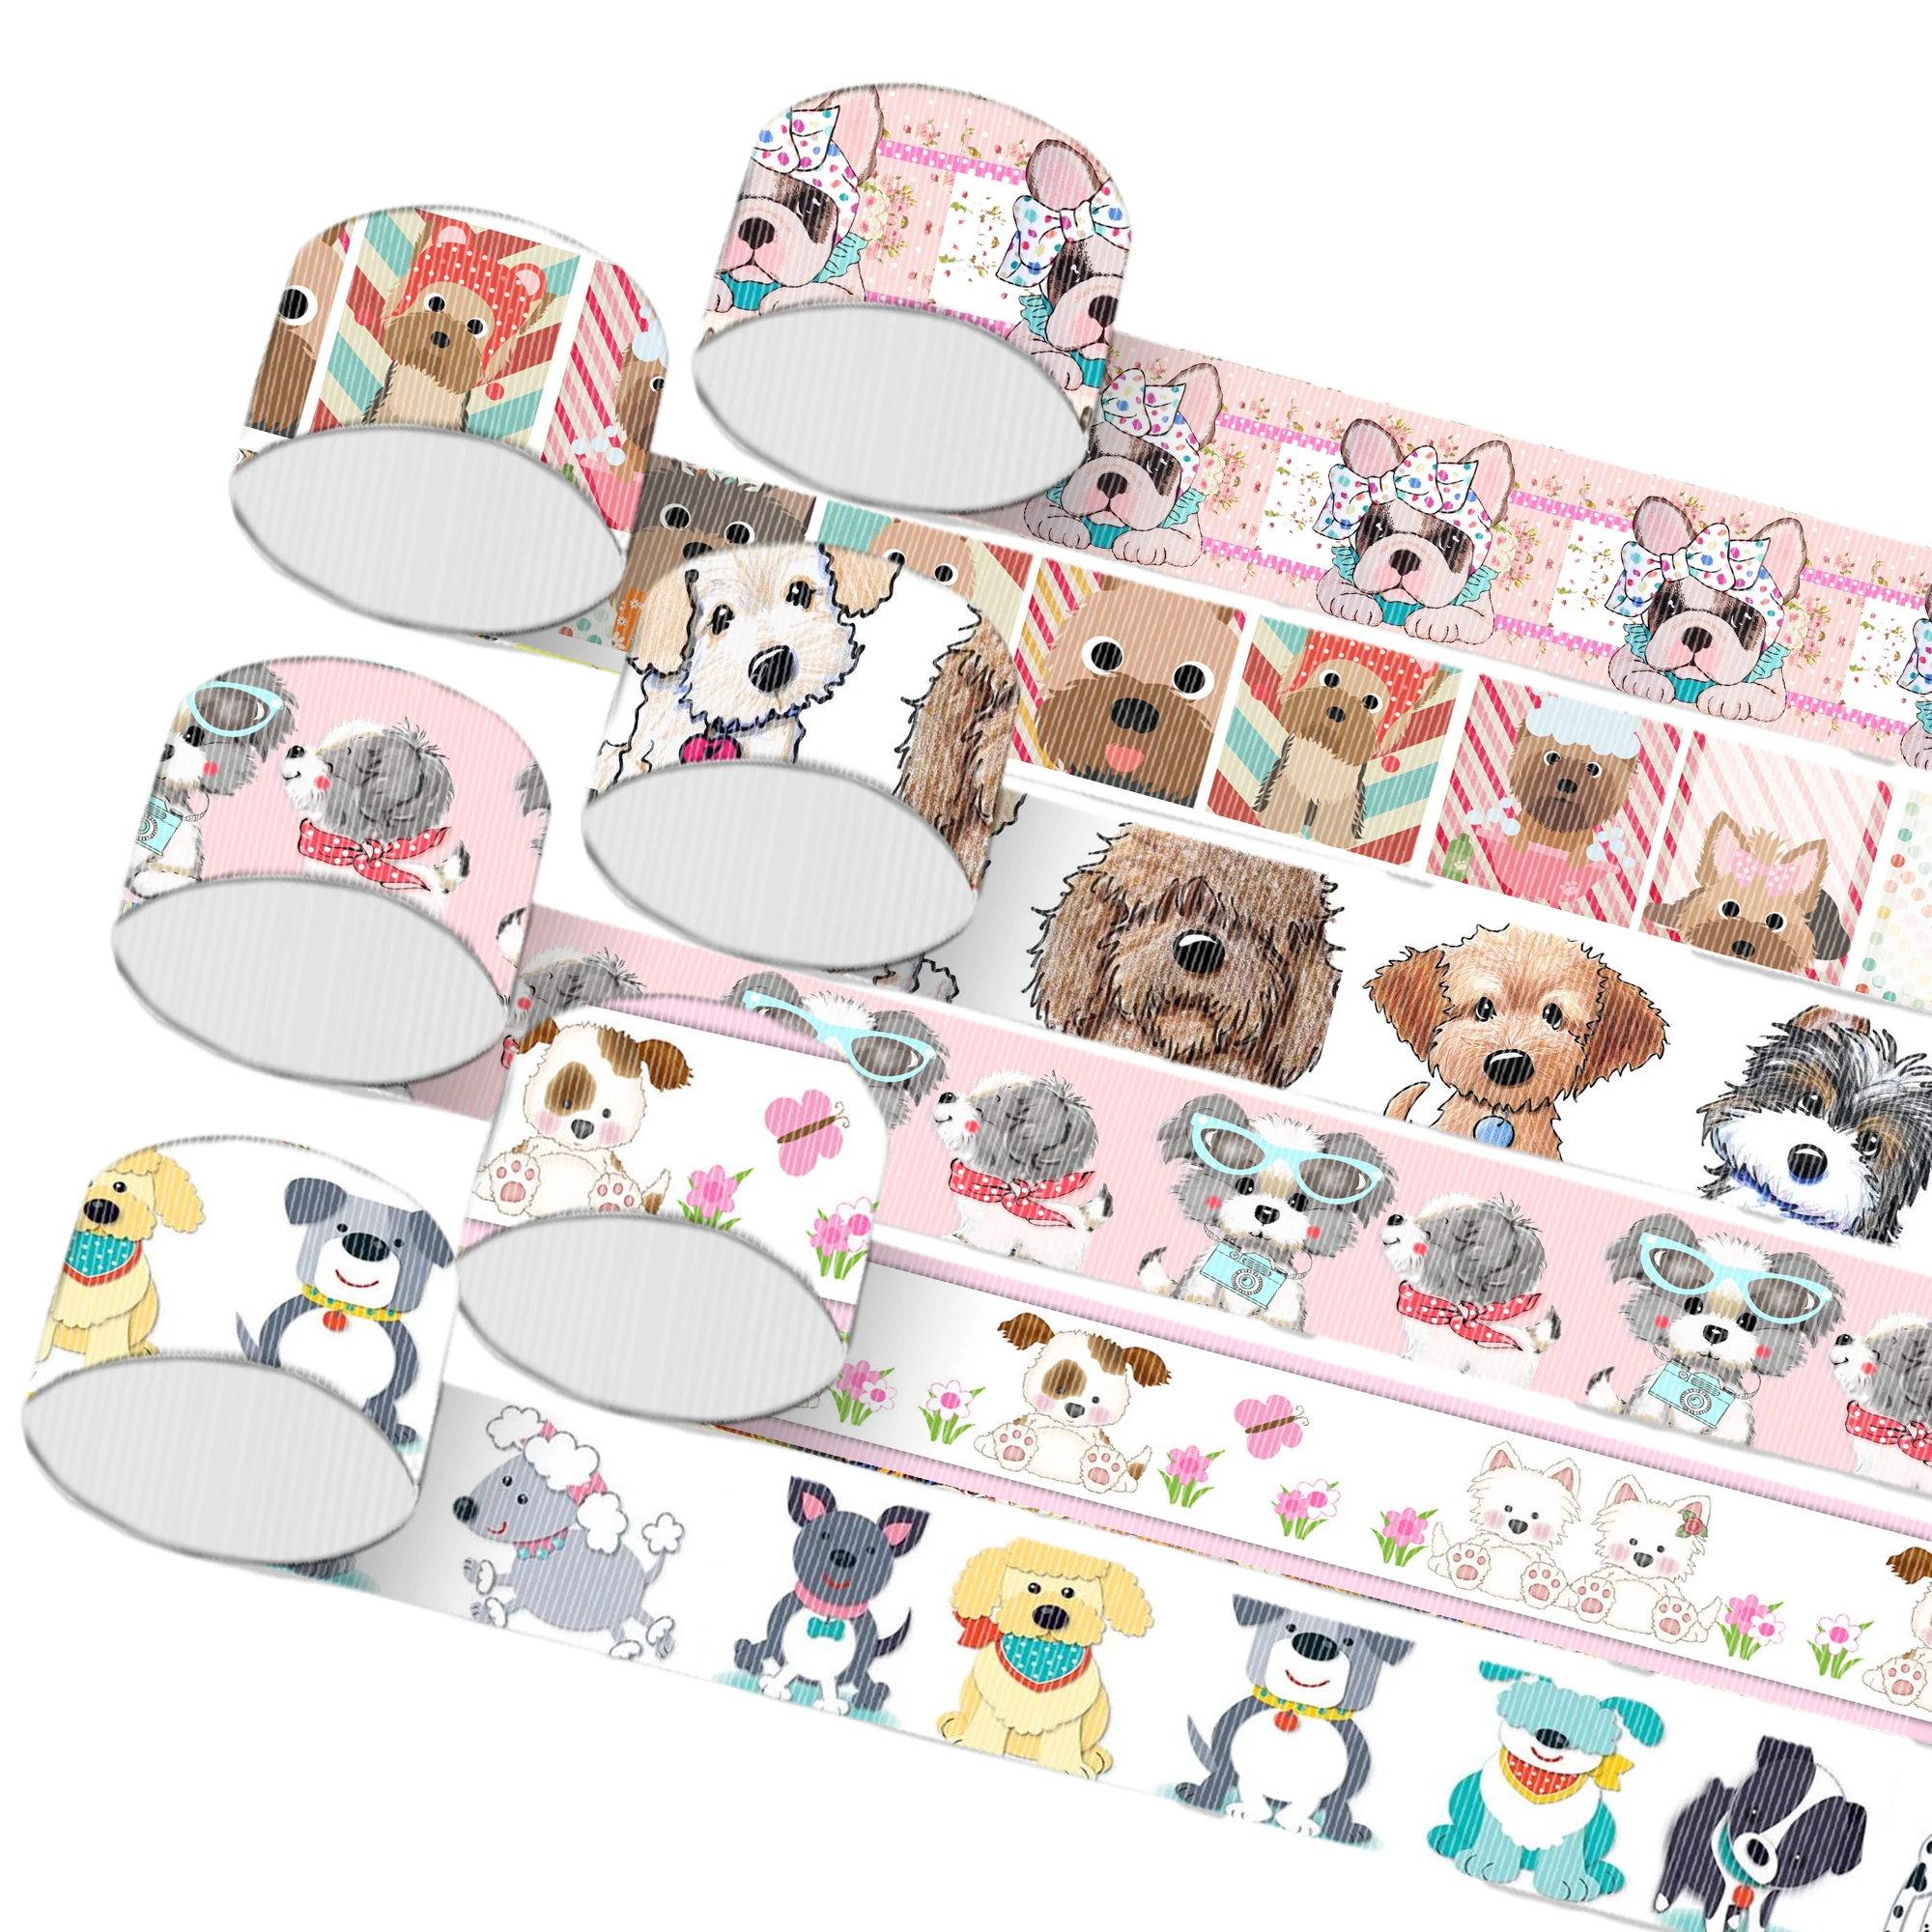 5 Yards Multi Sized Cute Dog Puppy Printed Grosgrain Ribbon Gift Wrapping DIY Art Sewing Bow-knot Crafts Home Packing,5Yc10011